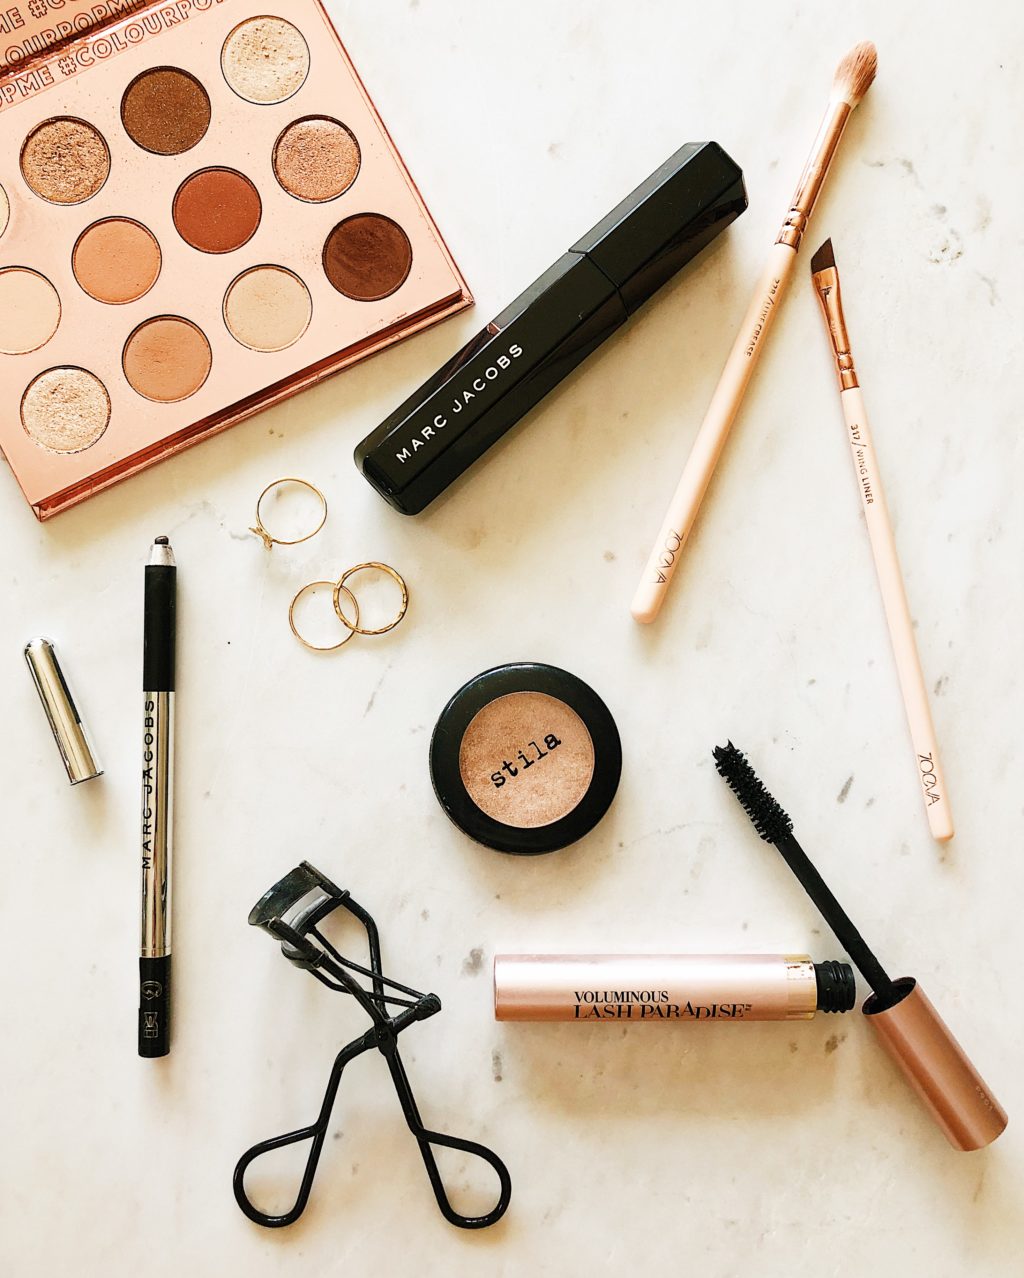 Top Five Must Haves for a Natural Makeup Look